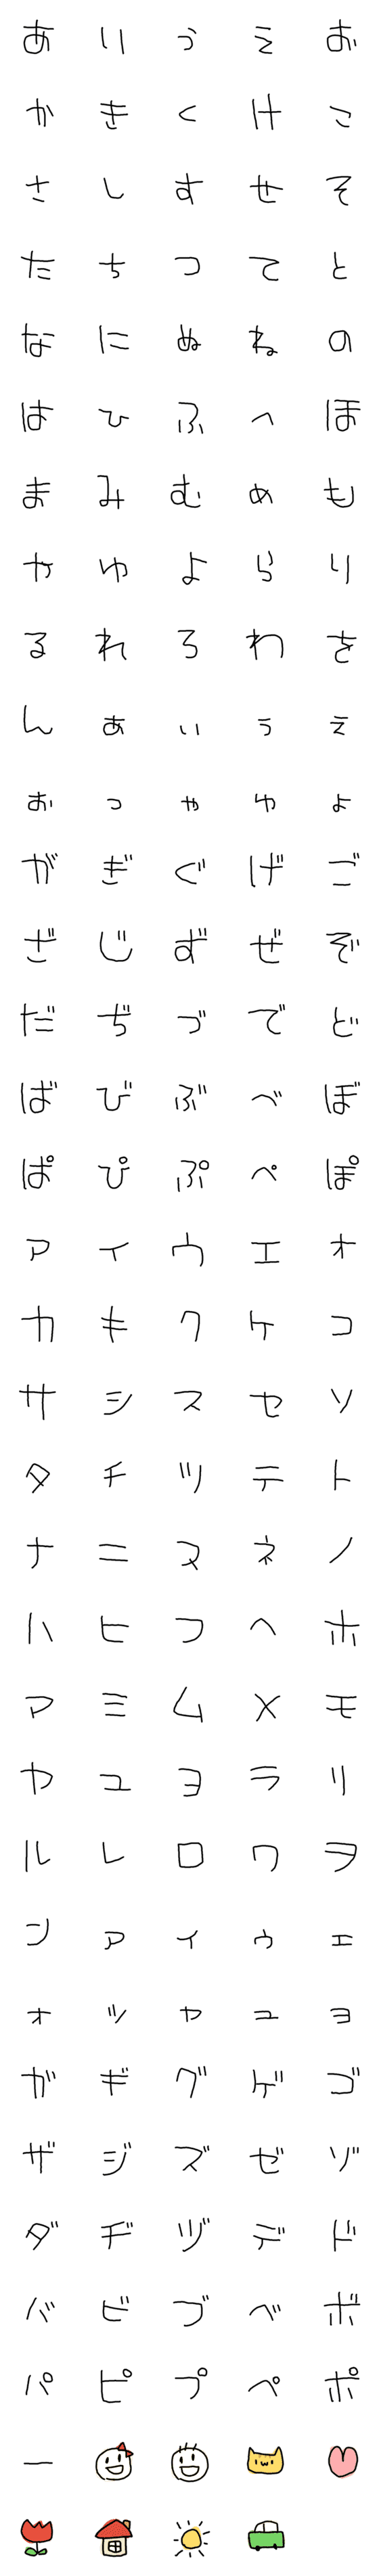 [LINE絵文字]【動く】こども文字の画像一覧